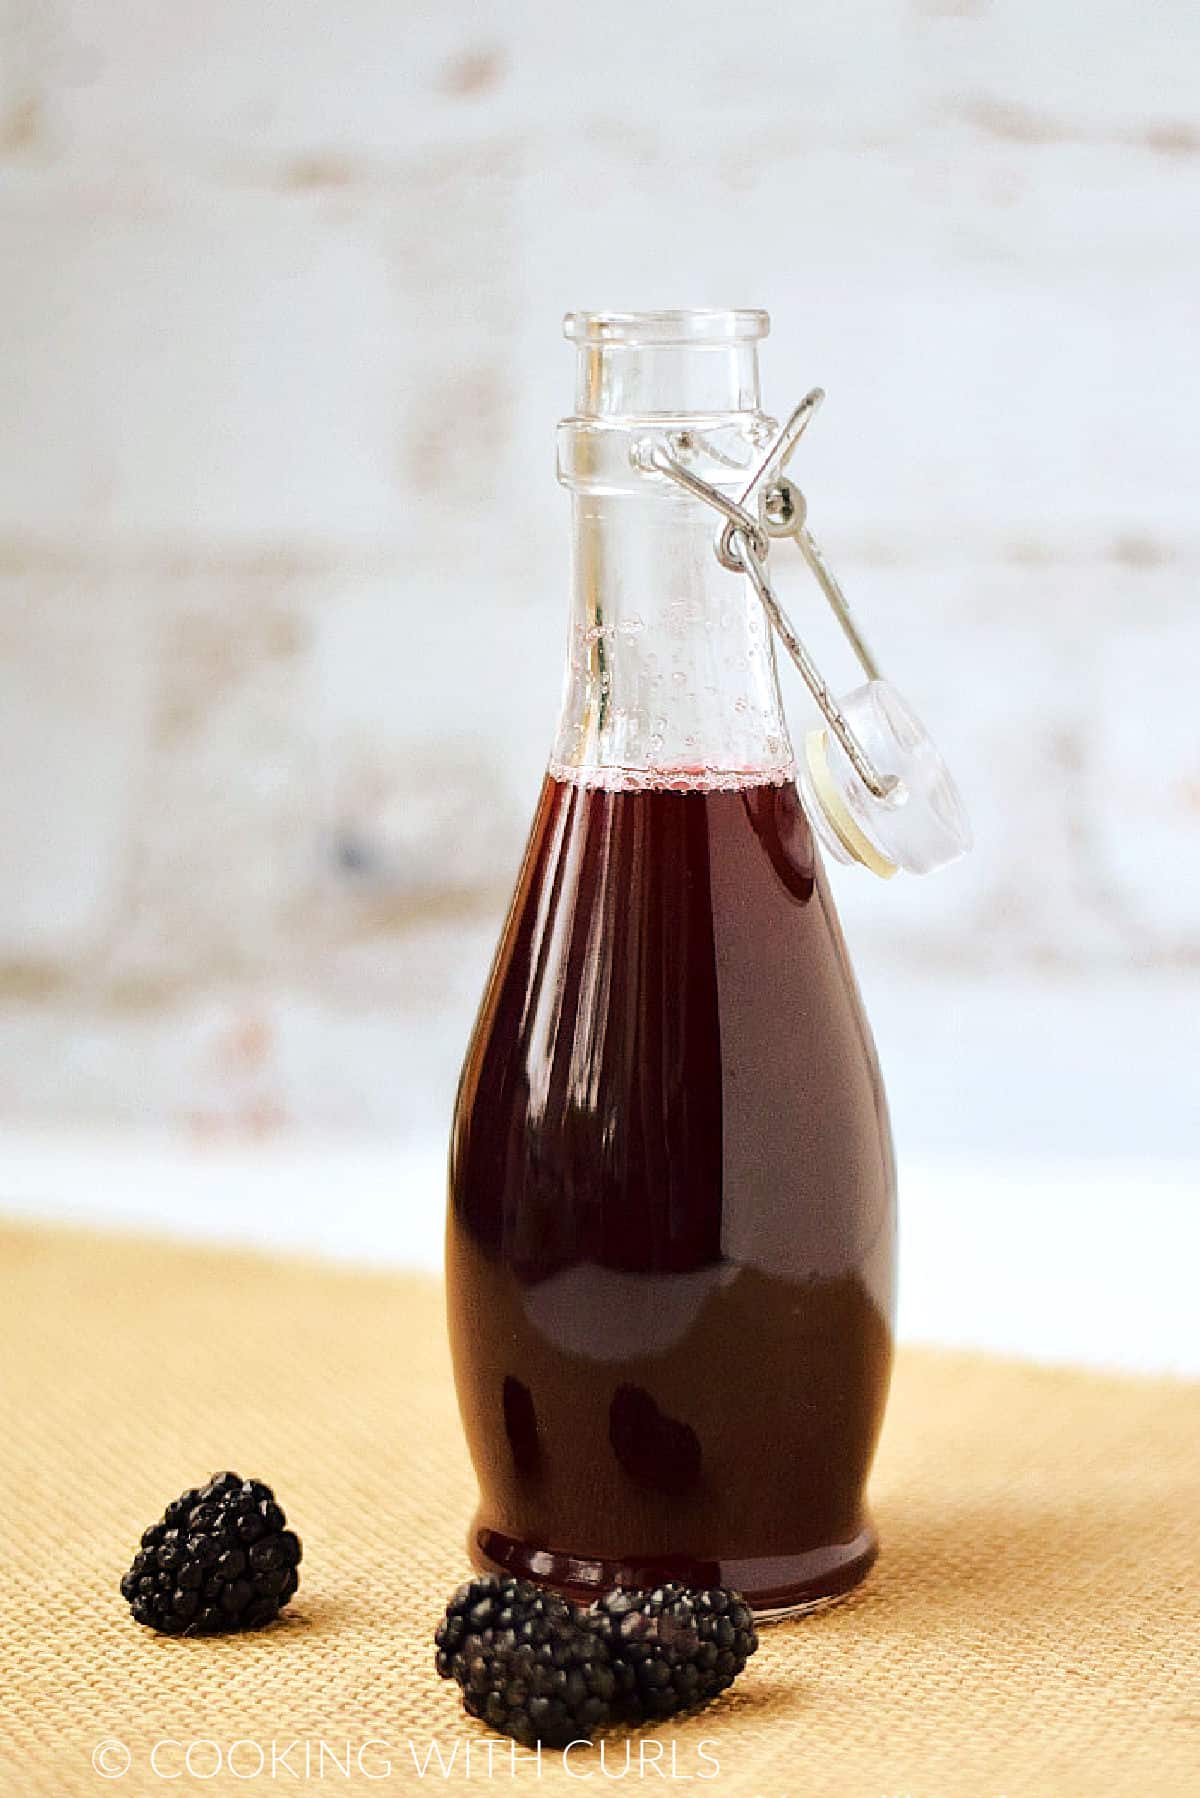 Blackberry syrup in a glass bottle with a swing top lid and fresh berries on a grass napkin.